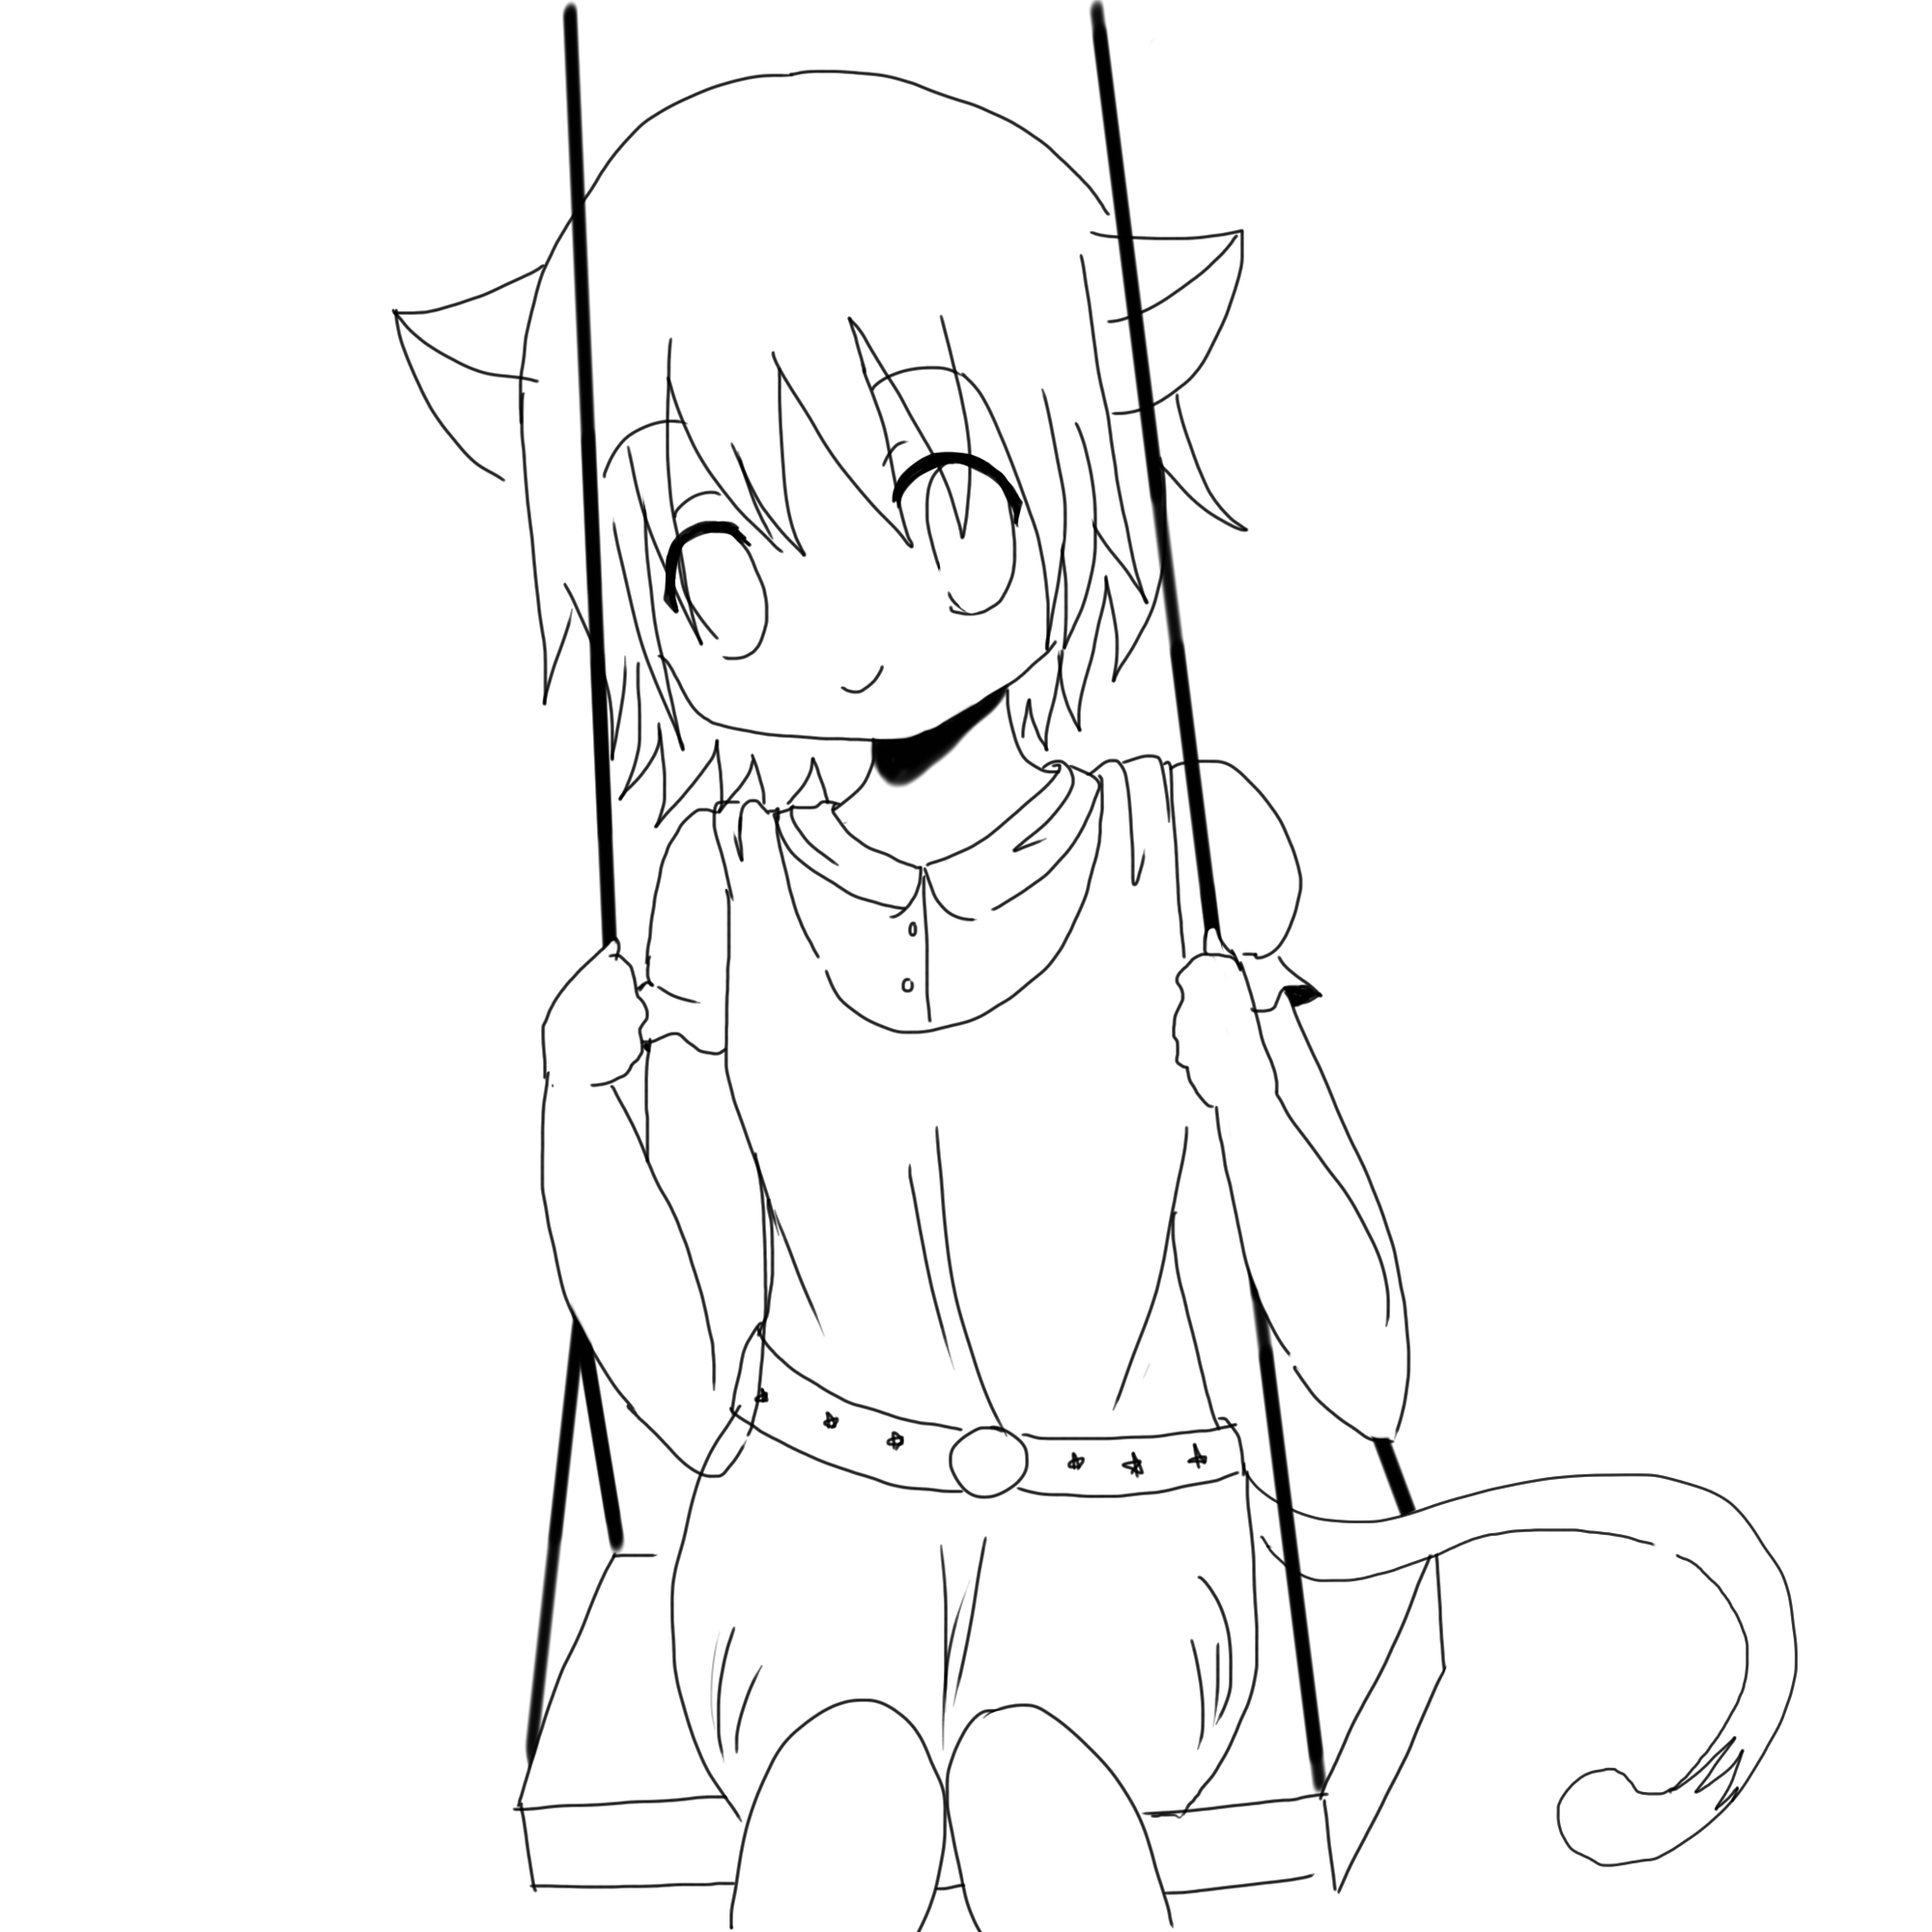 Cute Anime Cat Coloring Pages. Neko Girl Lineart By Watereye On